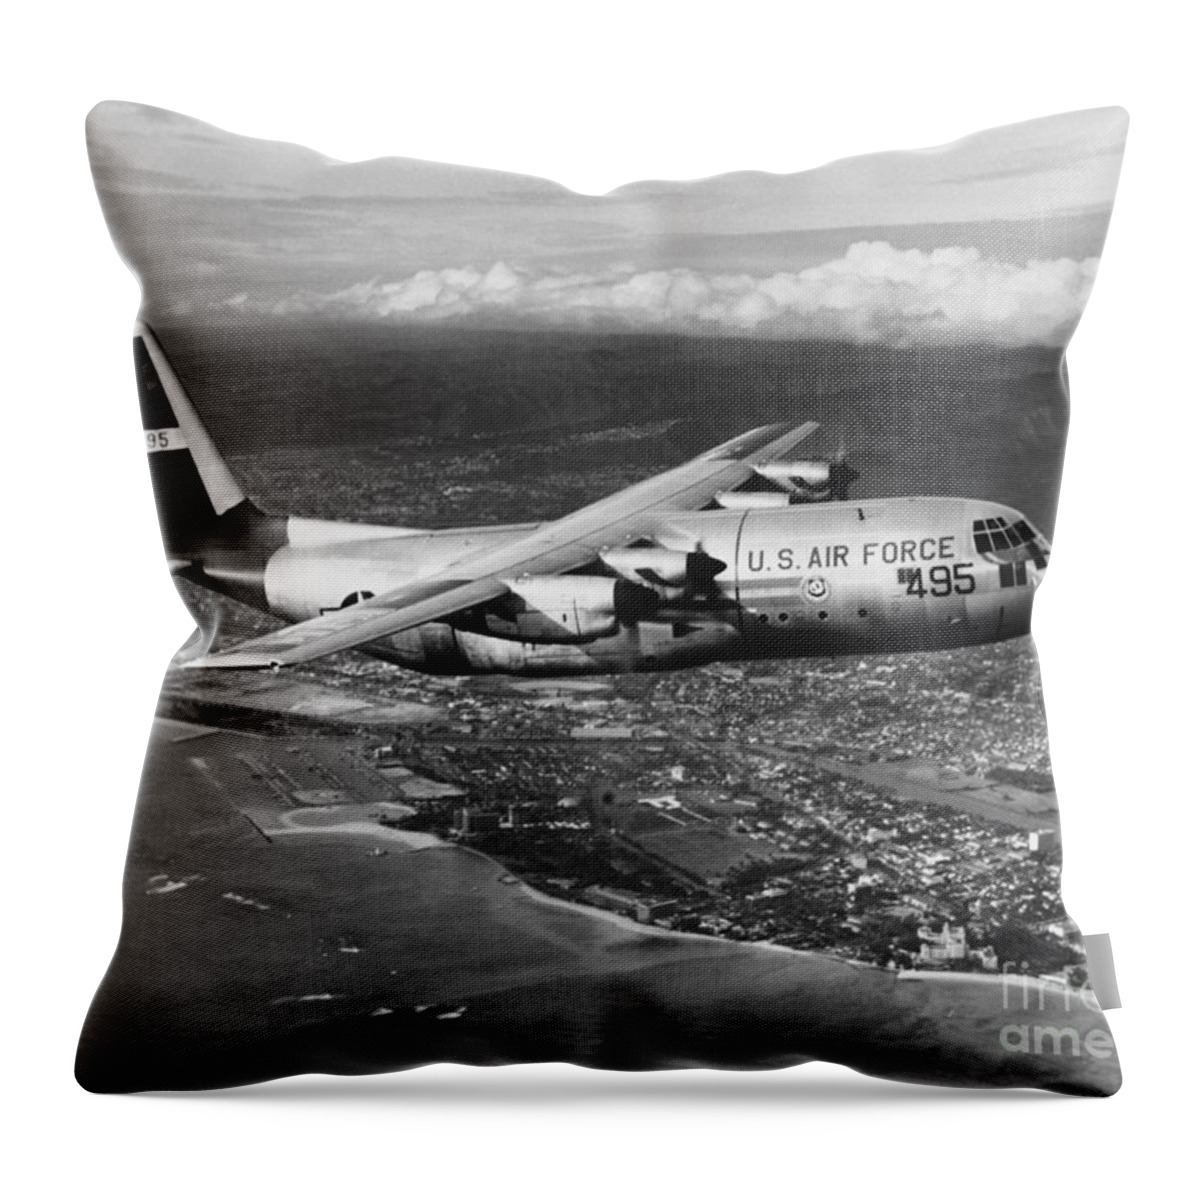 Historic Throw Pillow featuring the photograph Lockheed C-130 Hercules by Omikron